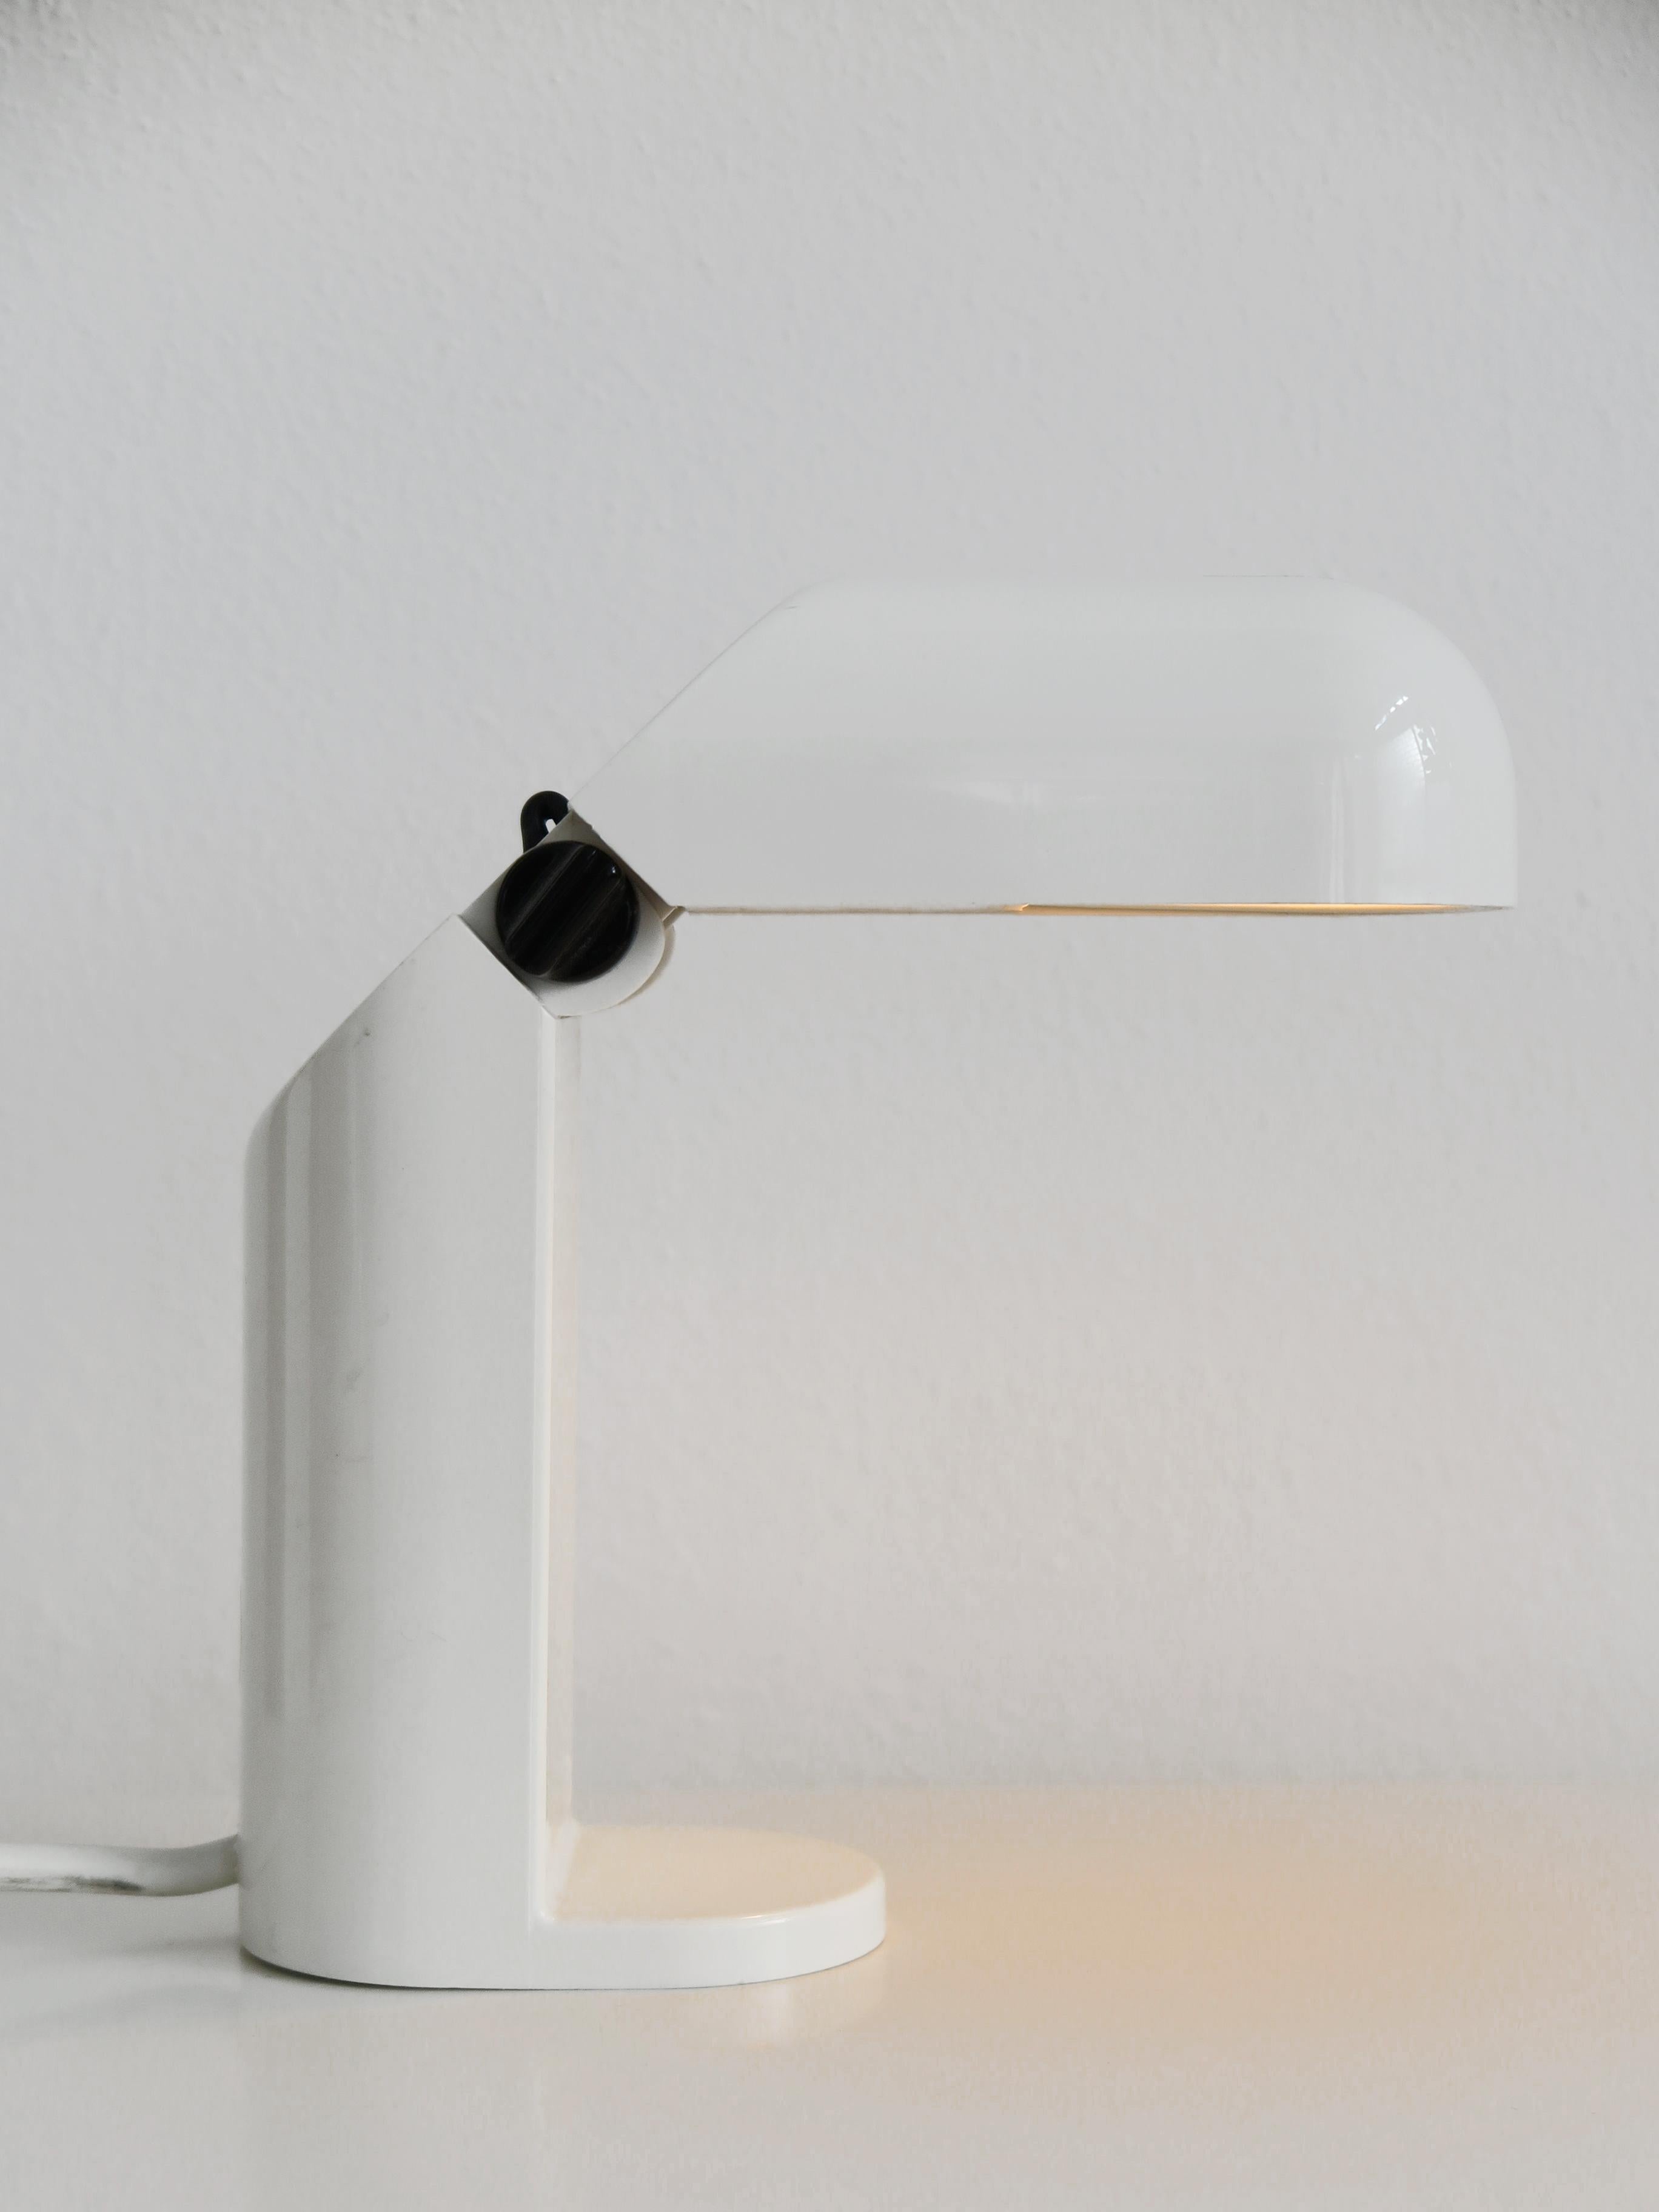 Italian Mid-Century Modern design plastic white table lamp, Italy 1970s.

Please note that the lamp is original of the period and this shows normal signs of age and use.